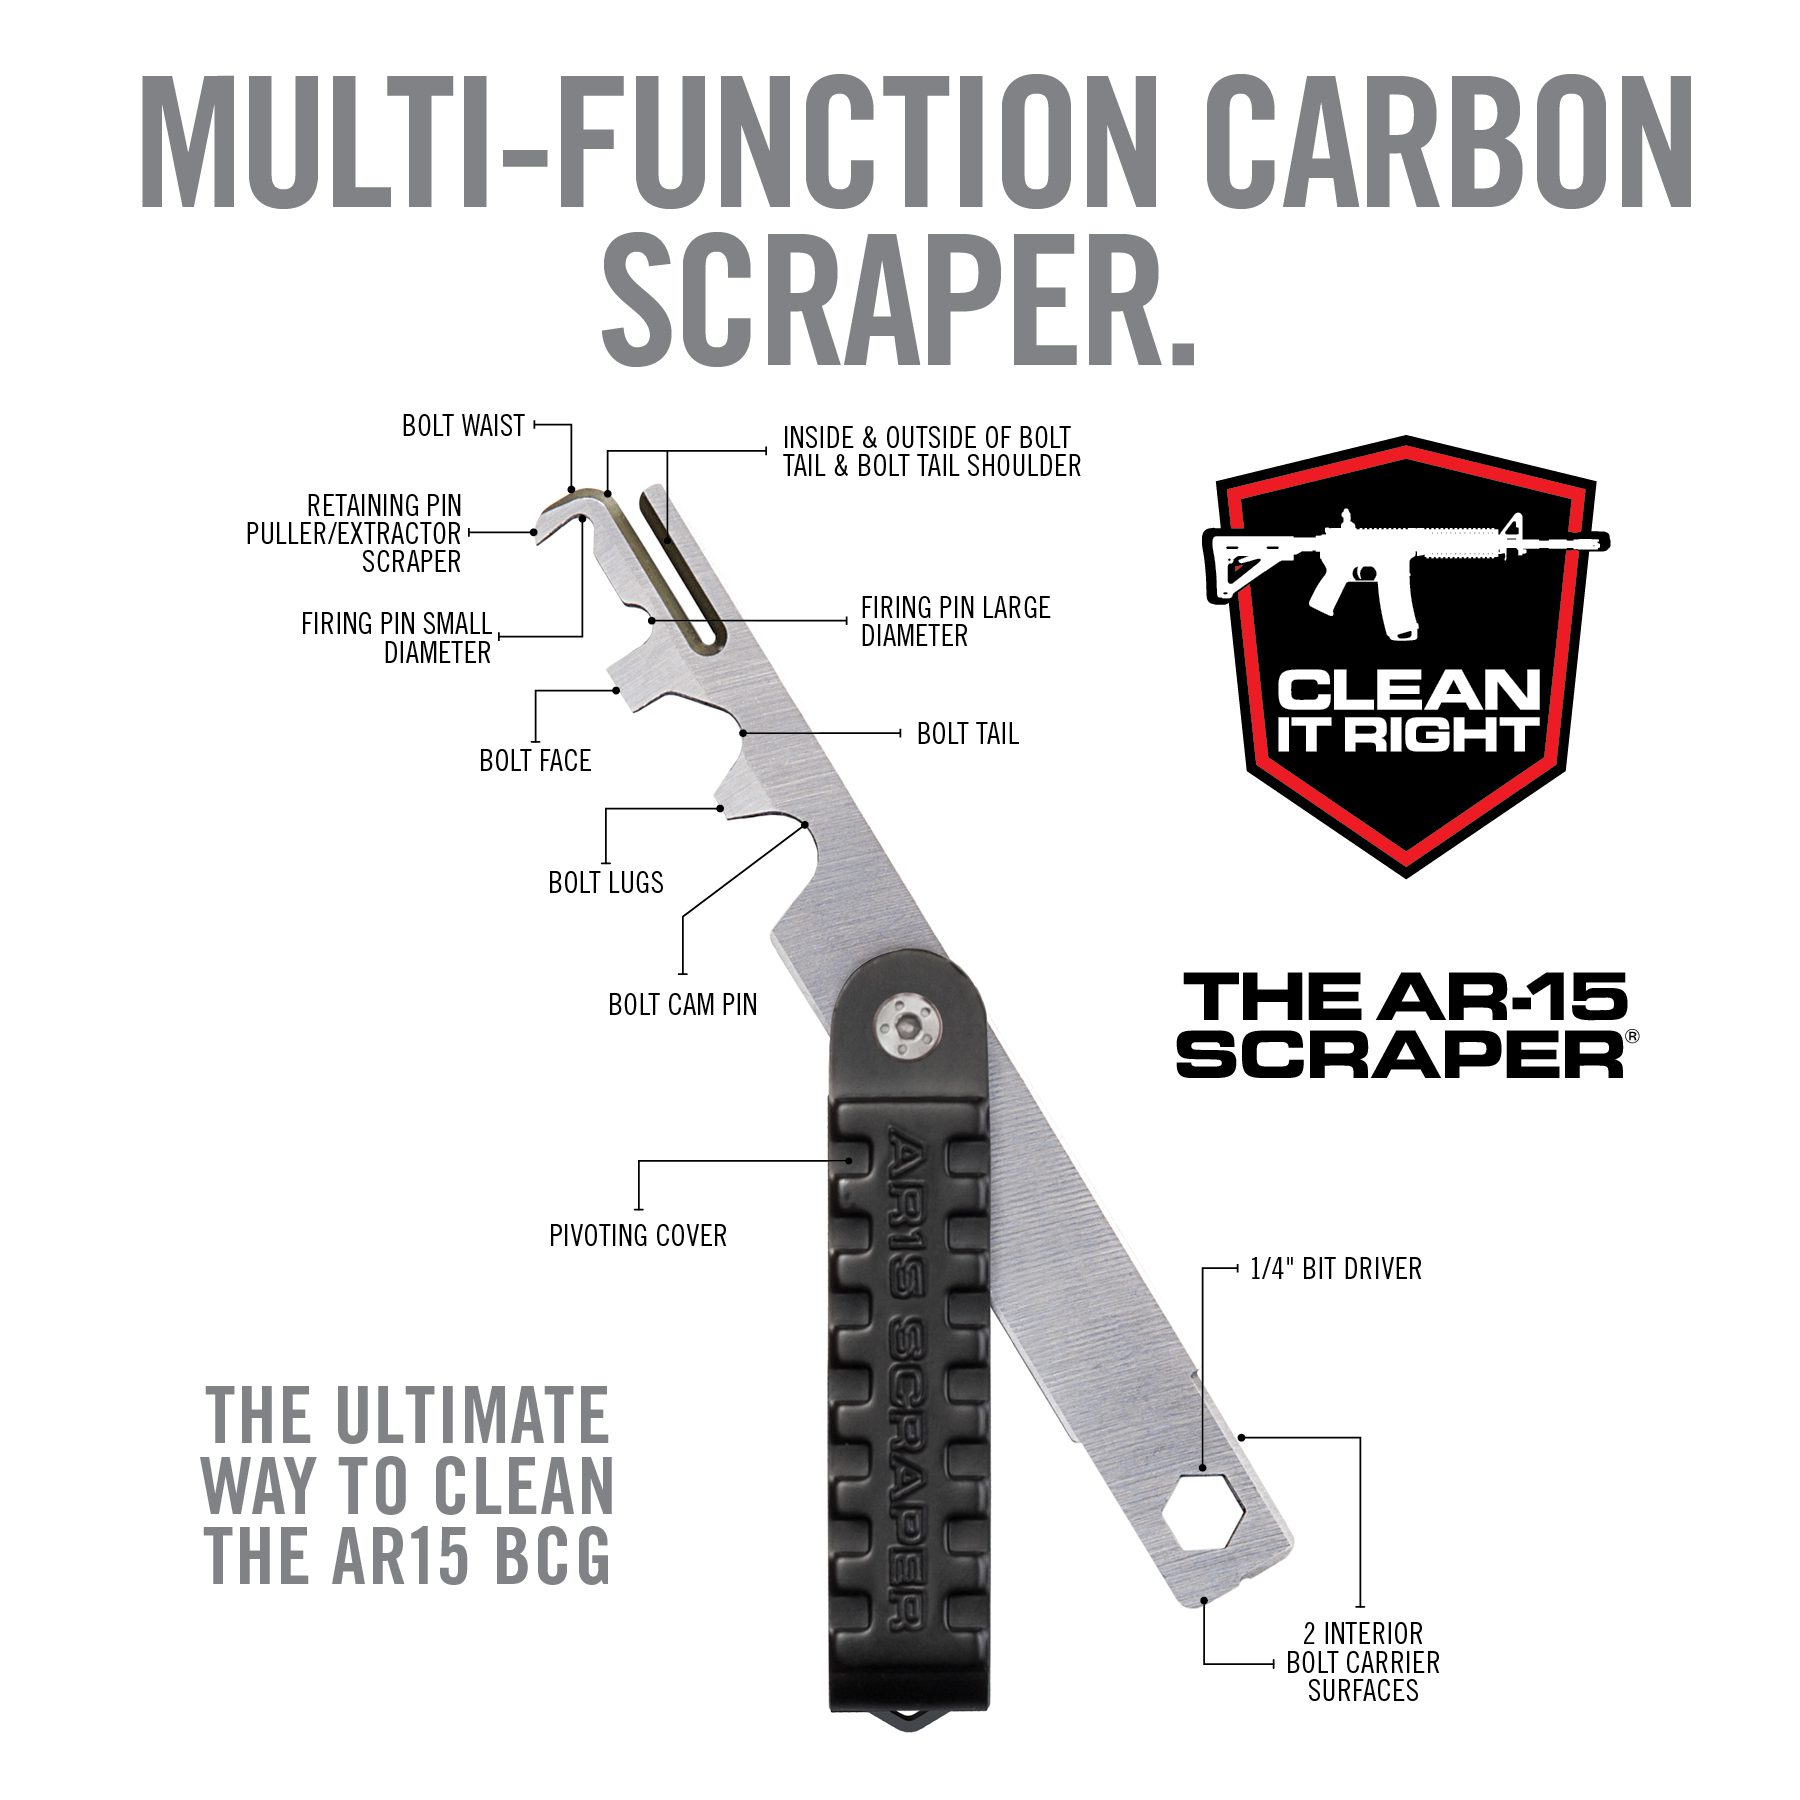 the multi - function carbon scraper is designed to be used on many different types of knives